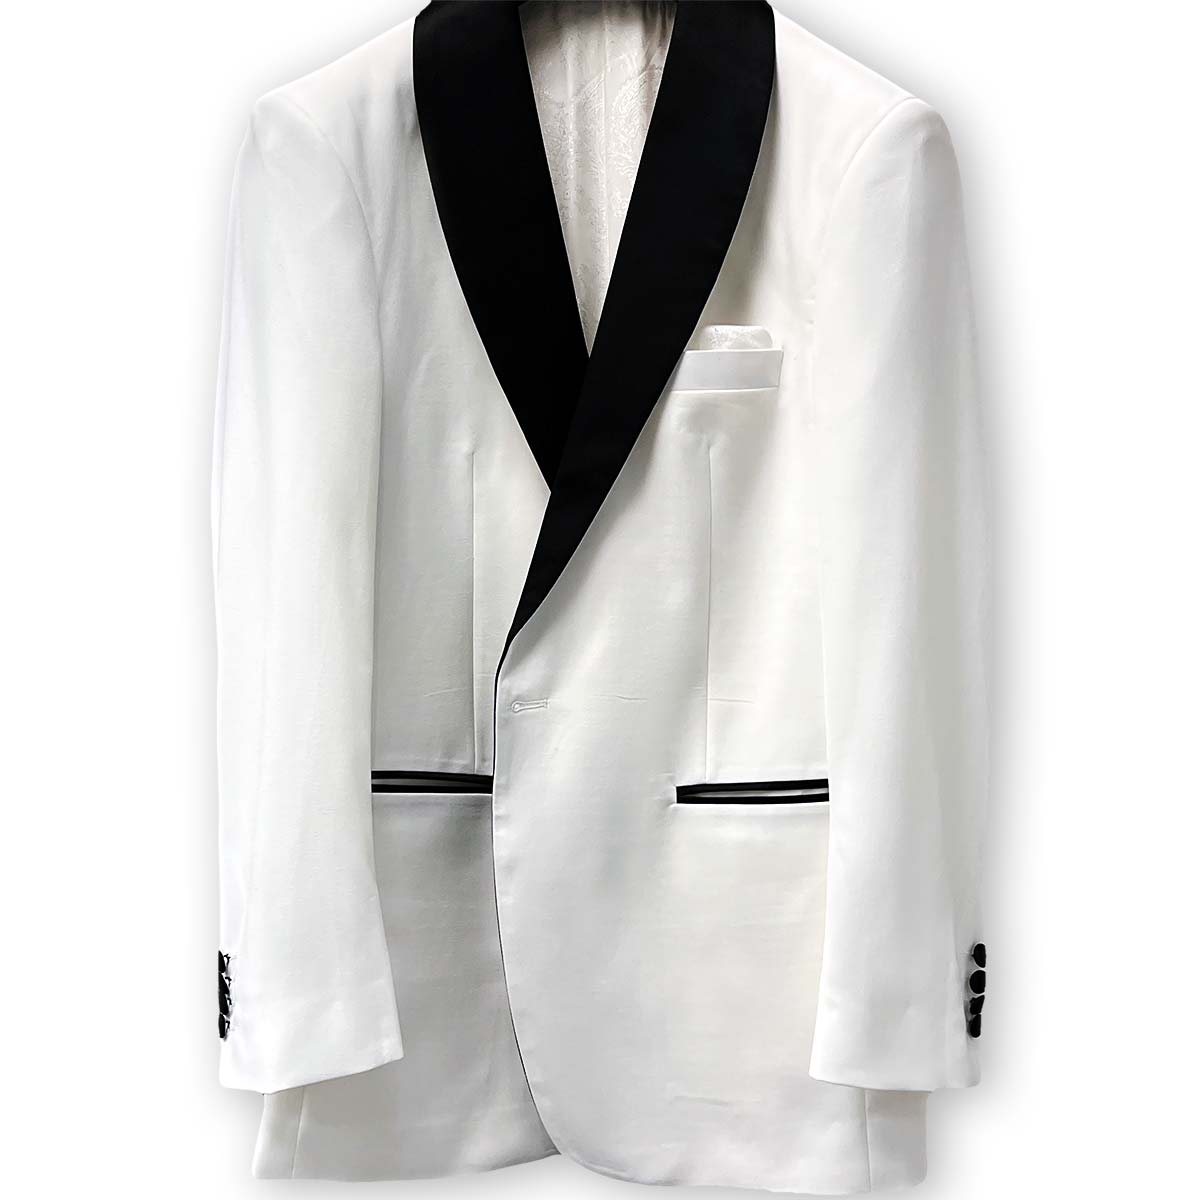 Westwood Hart white wool tuxedo crafted from 100% Australian Merino wool with black grosgrain contrast trimming.